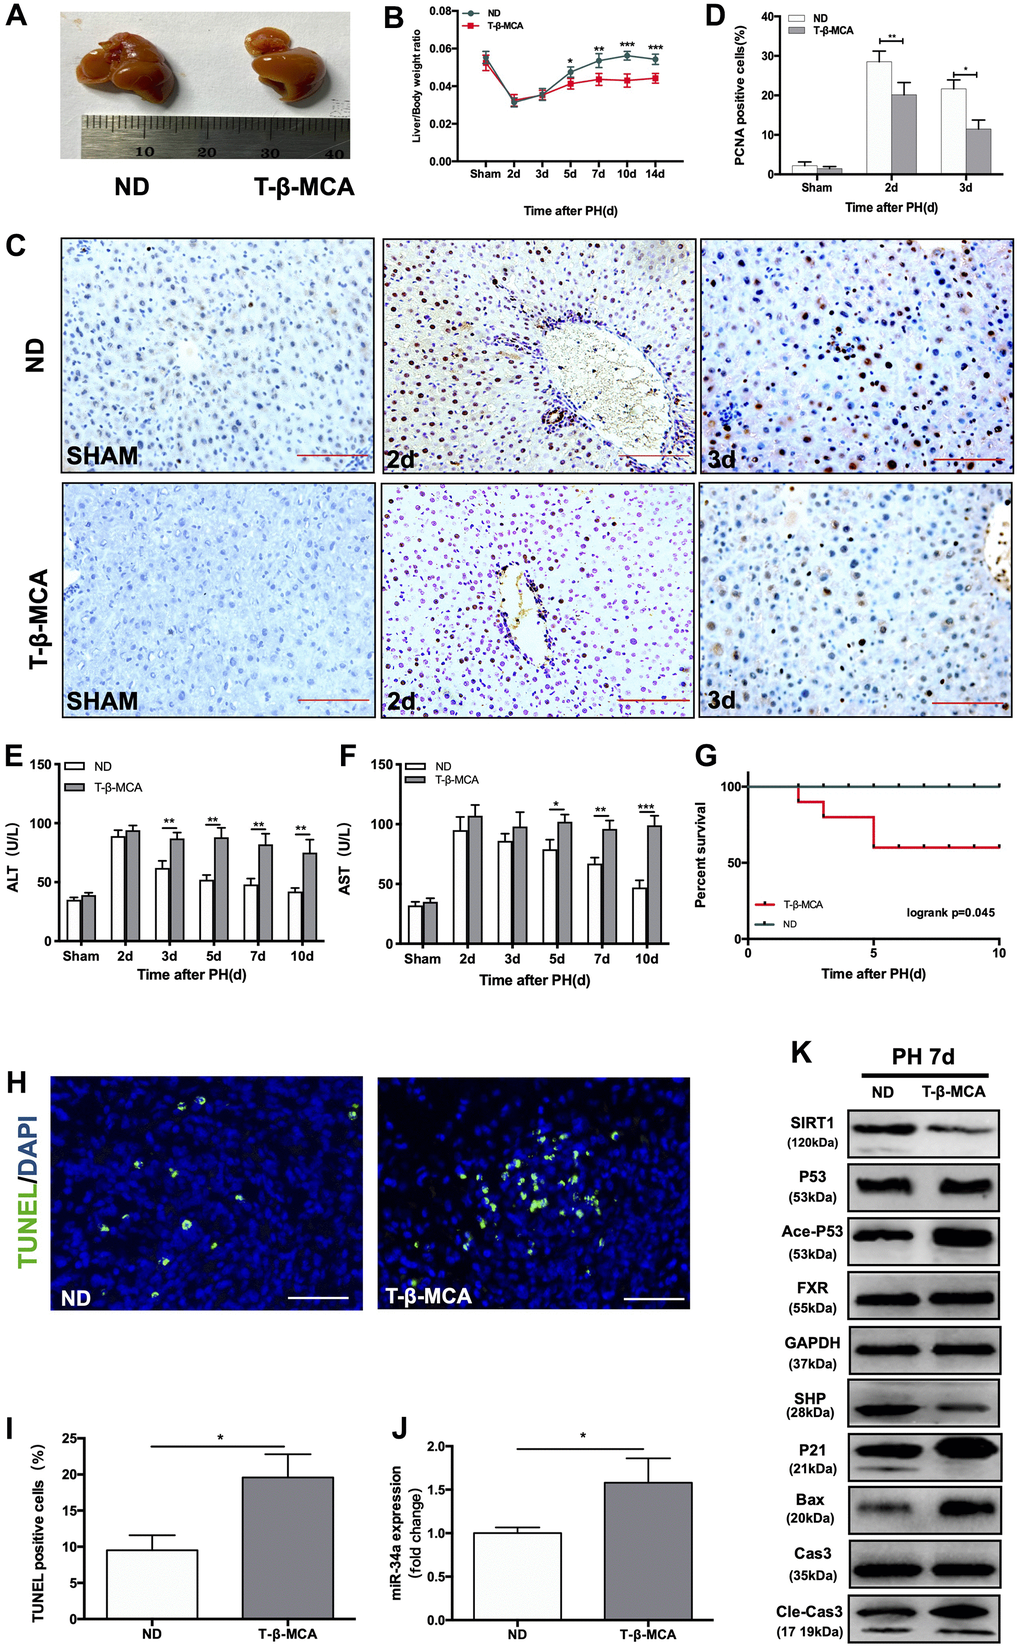 T-β-MCA facilitates the P53/miR-34a/SIRT1 positive feedback loop during LR by suppressing the FXR/SHP signaling pathway in vivo. (A) Representative livers from mice at 7 days after PH between ND and T-β-MCA mice. Mice in the T-β-MCA group were administered T-β-MCA (400 mg/kg) by gavage 1 day before PH and every 3 days after PH. (B) Liver weight relative to body weight at the indicated time points after PH. (C) Representative images of PCNA staining at the indicated time points after PH from the ND and T-β-MCA groups. (magnification: × 200, Scale bars represent 50 μm). (D) Quantification of PCNA-positive cells in the liver at the indicated time points after PH. (E, F) Serum AST and ALT levels in mice from the ND and MCA groups after PH. (G) Survival rate of mice that underwent PH from the ND and T-β-MCA groups(p=0.045, logrank test). (H) Representative images of TUNEL staining at day 7 after PH in liver tissue (magnification: ×400). (I) Quantification of TUNEL-positive cells in the liver at day 7 after PH. (J) Quantification of hepatic miR-34a expression in mice with/without administration of T-β-MCA. (K) Protein expression of P53/miR-34a/SIRT1 positive feedback loop genes and FXR/SHP signaling with/without administration of T-β-MCA. *, p0.05; *, p